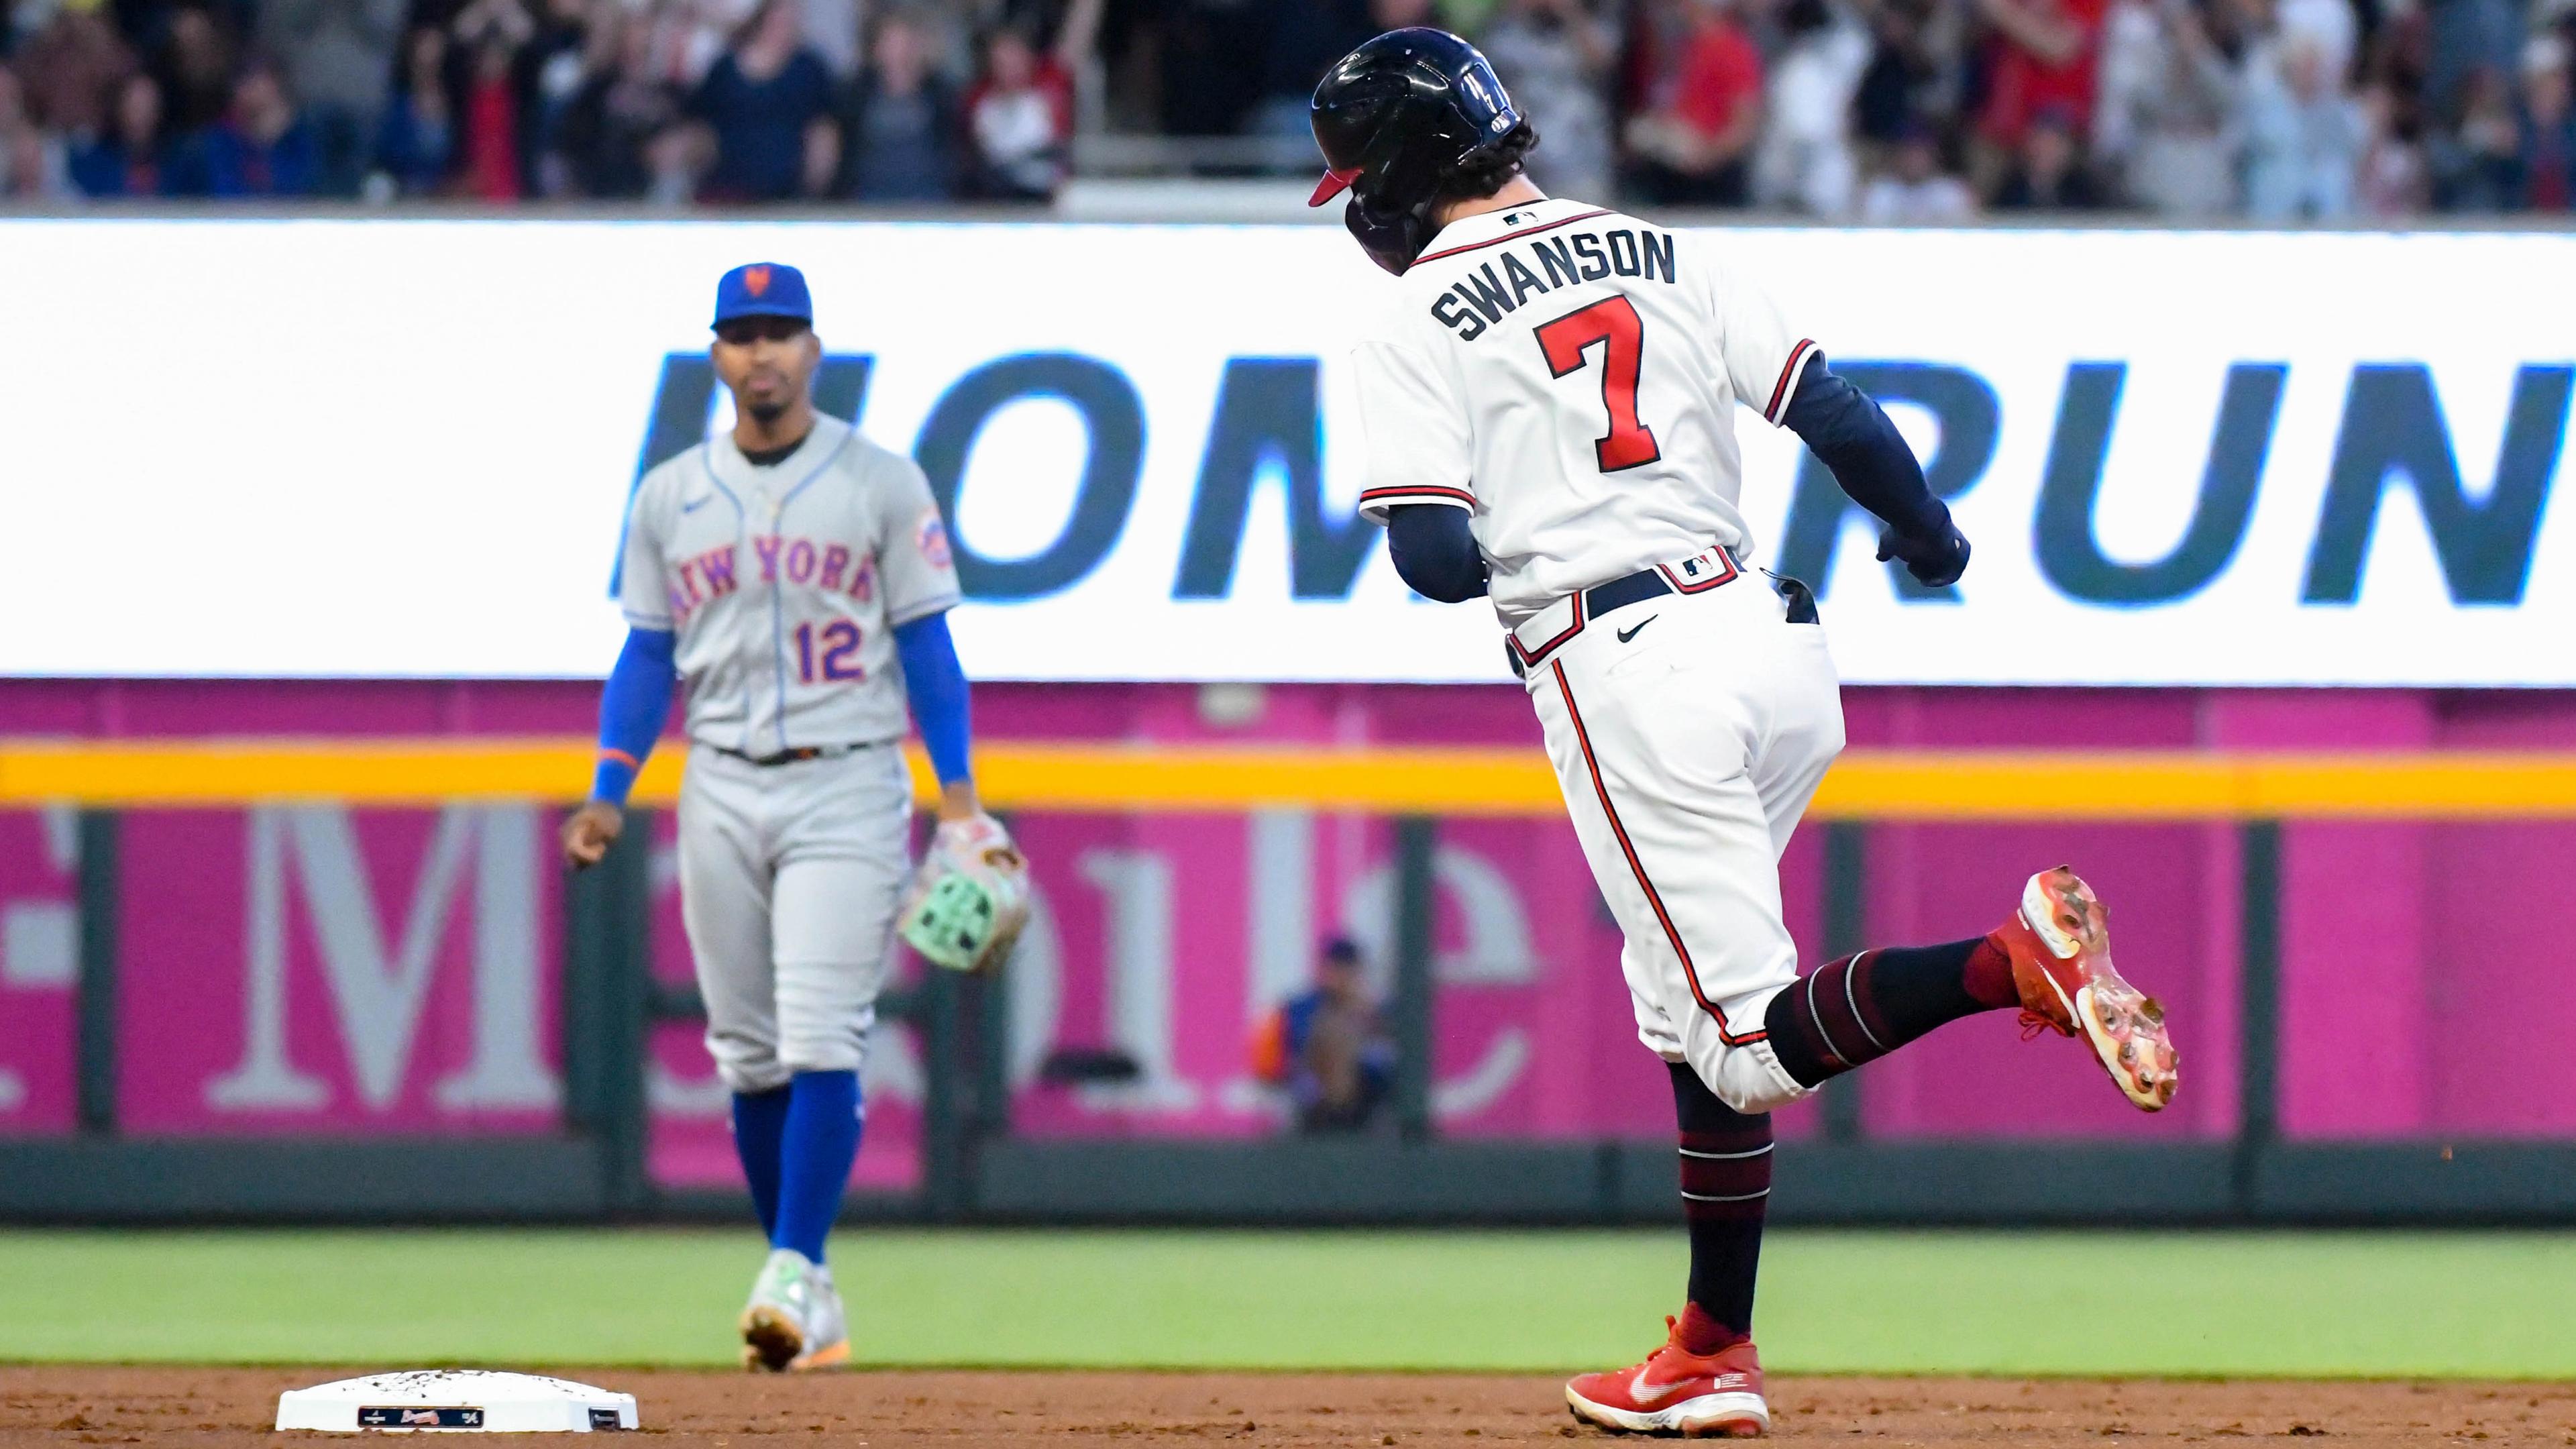 Francisco Lindor watches Dansby Swanson round bases in Atlanta / Larry Robinson - USA TODAY Sports